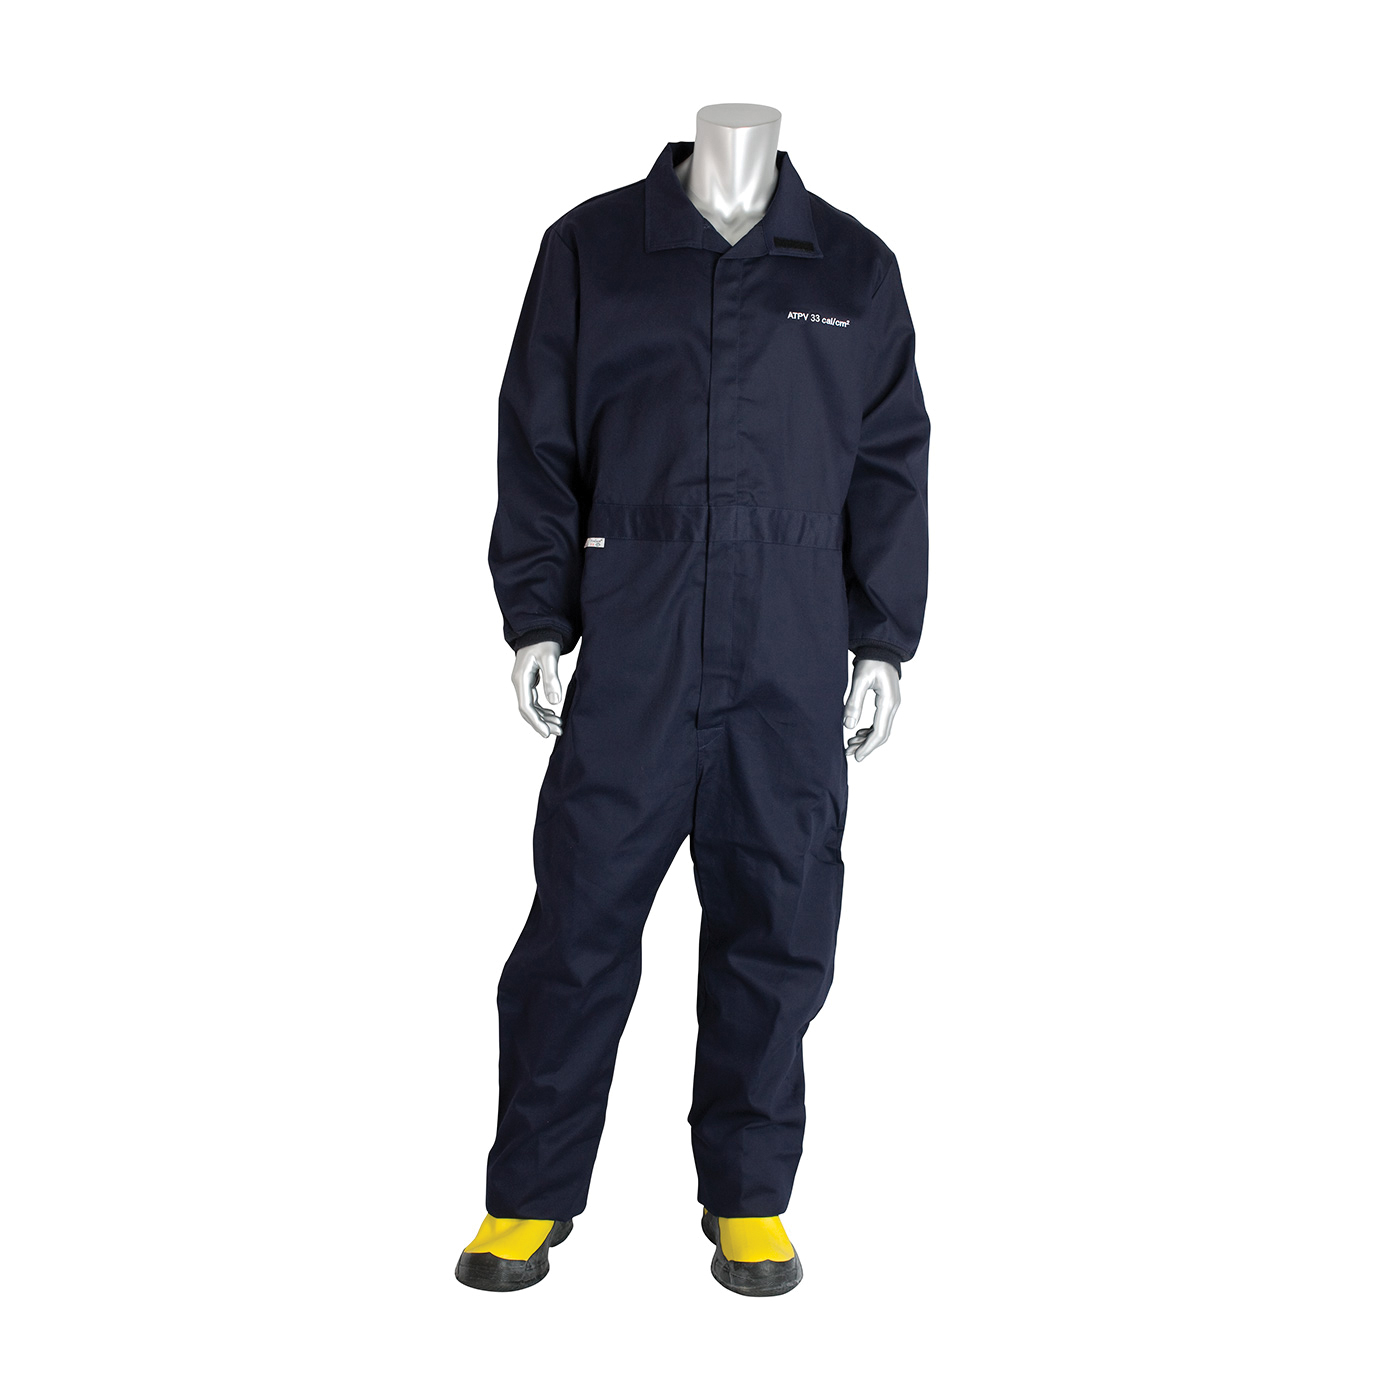 PIP® 9100-52758/M Flame Resistant Coverall, M, Navy, 88% Cotton/12% Nylon, 40 to 42 in Chest, 32 in L Inseam